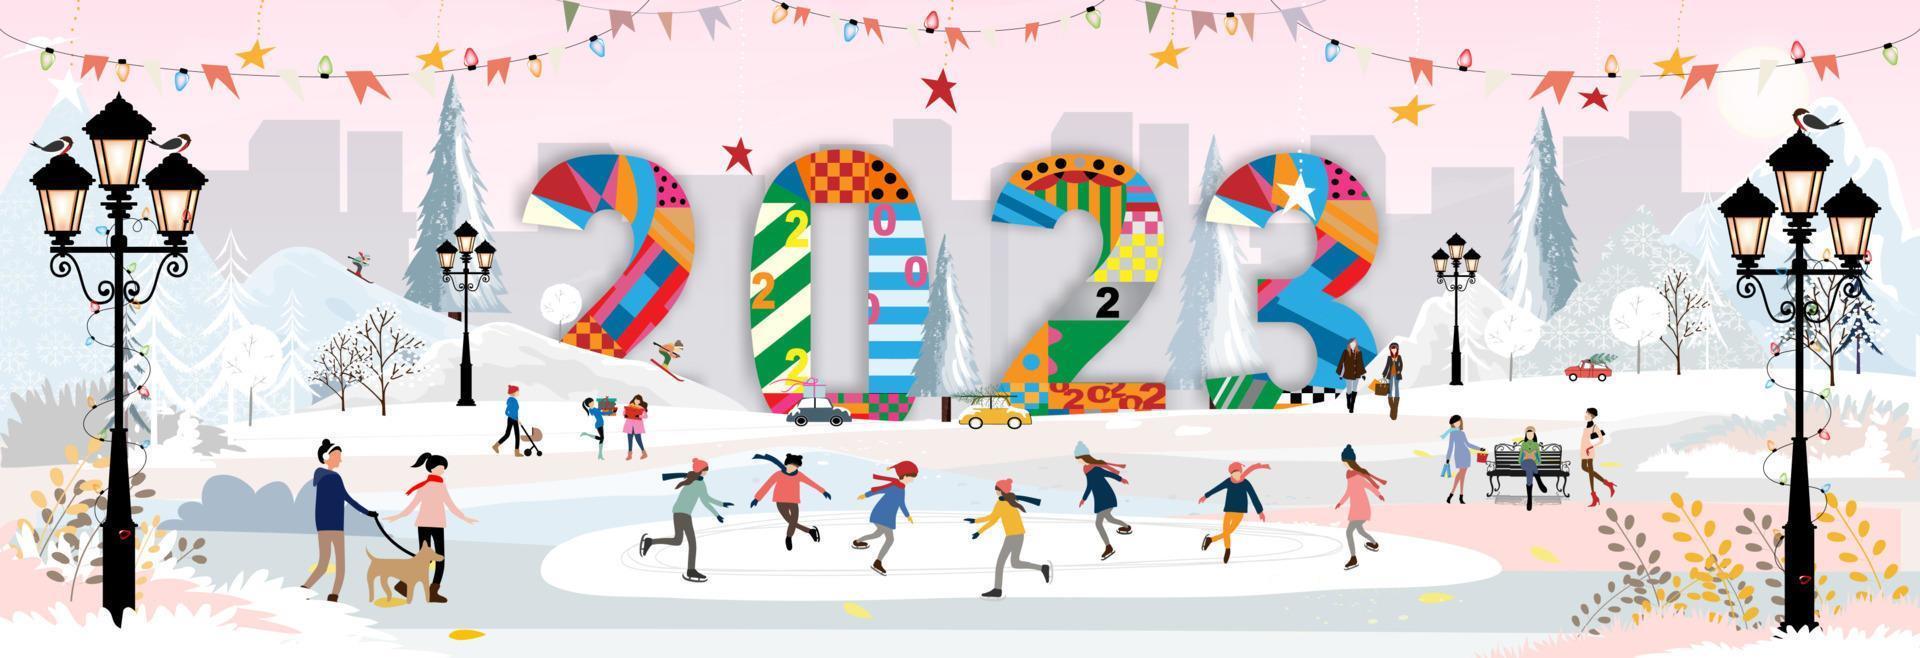 Happy New Year 2023 card,Vector Winter landscape in city with people celebrating on Chritsmas Eve.Winter wonderland in the town with happy kids playing ice skating in the city park vector